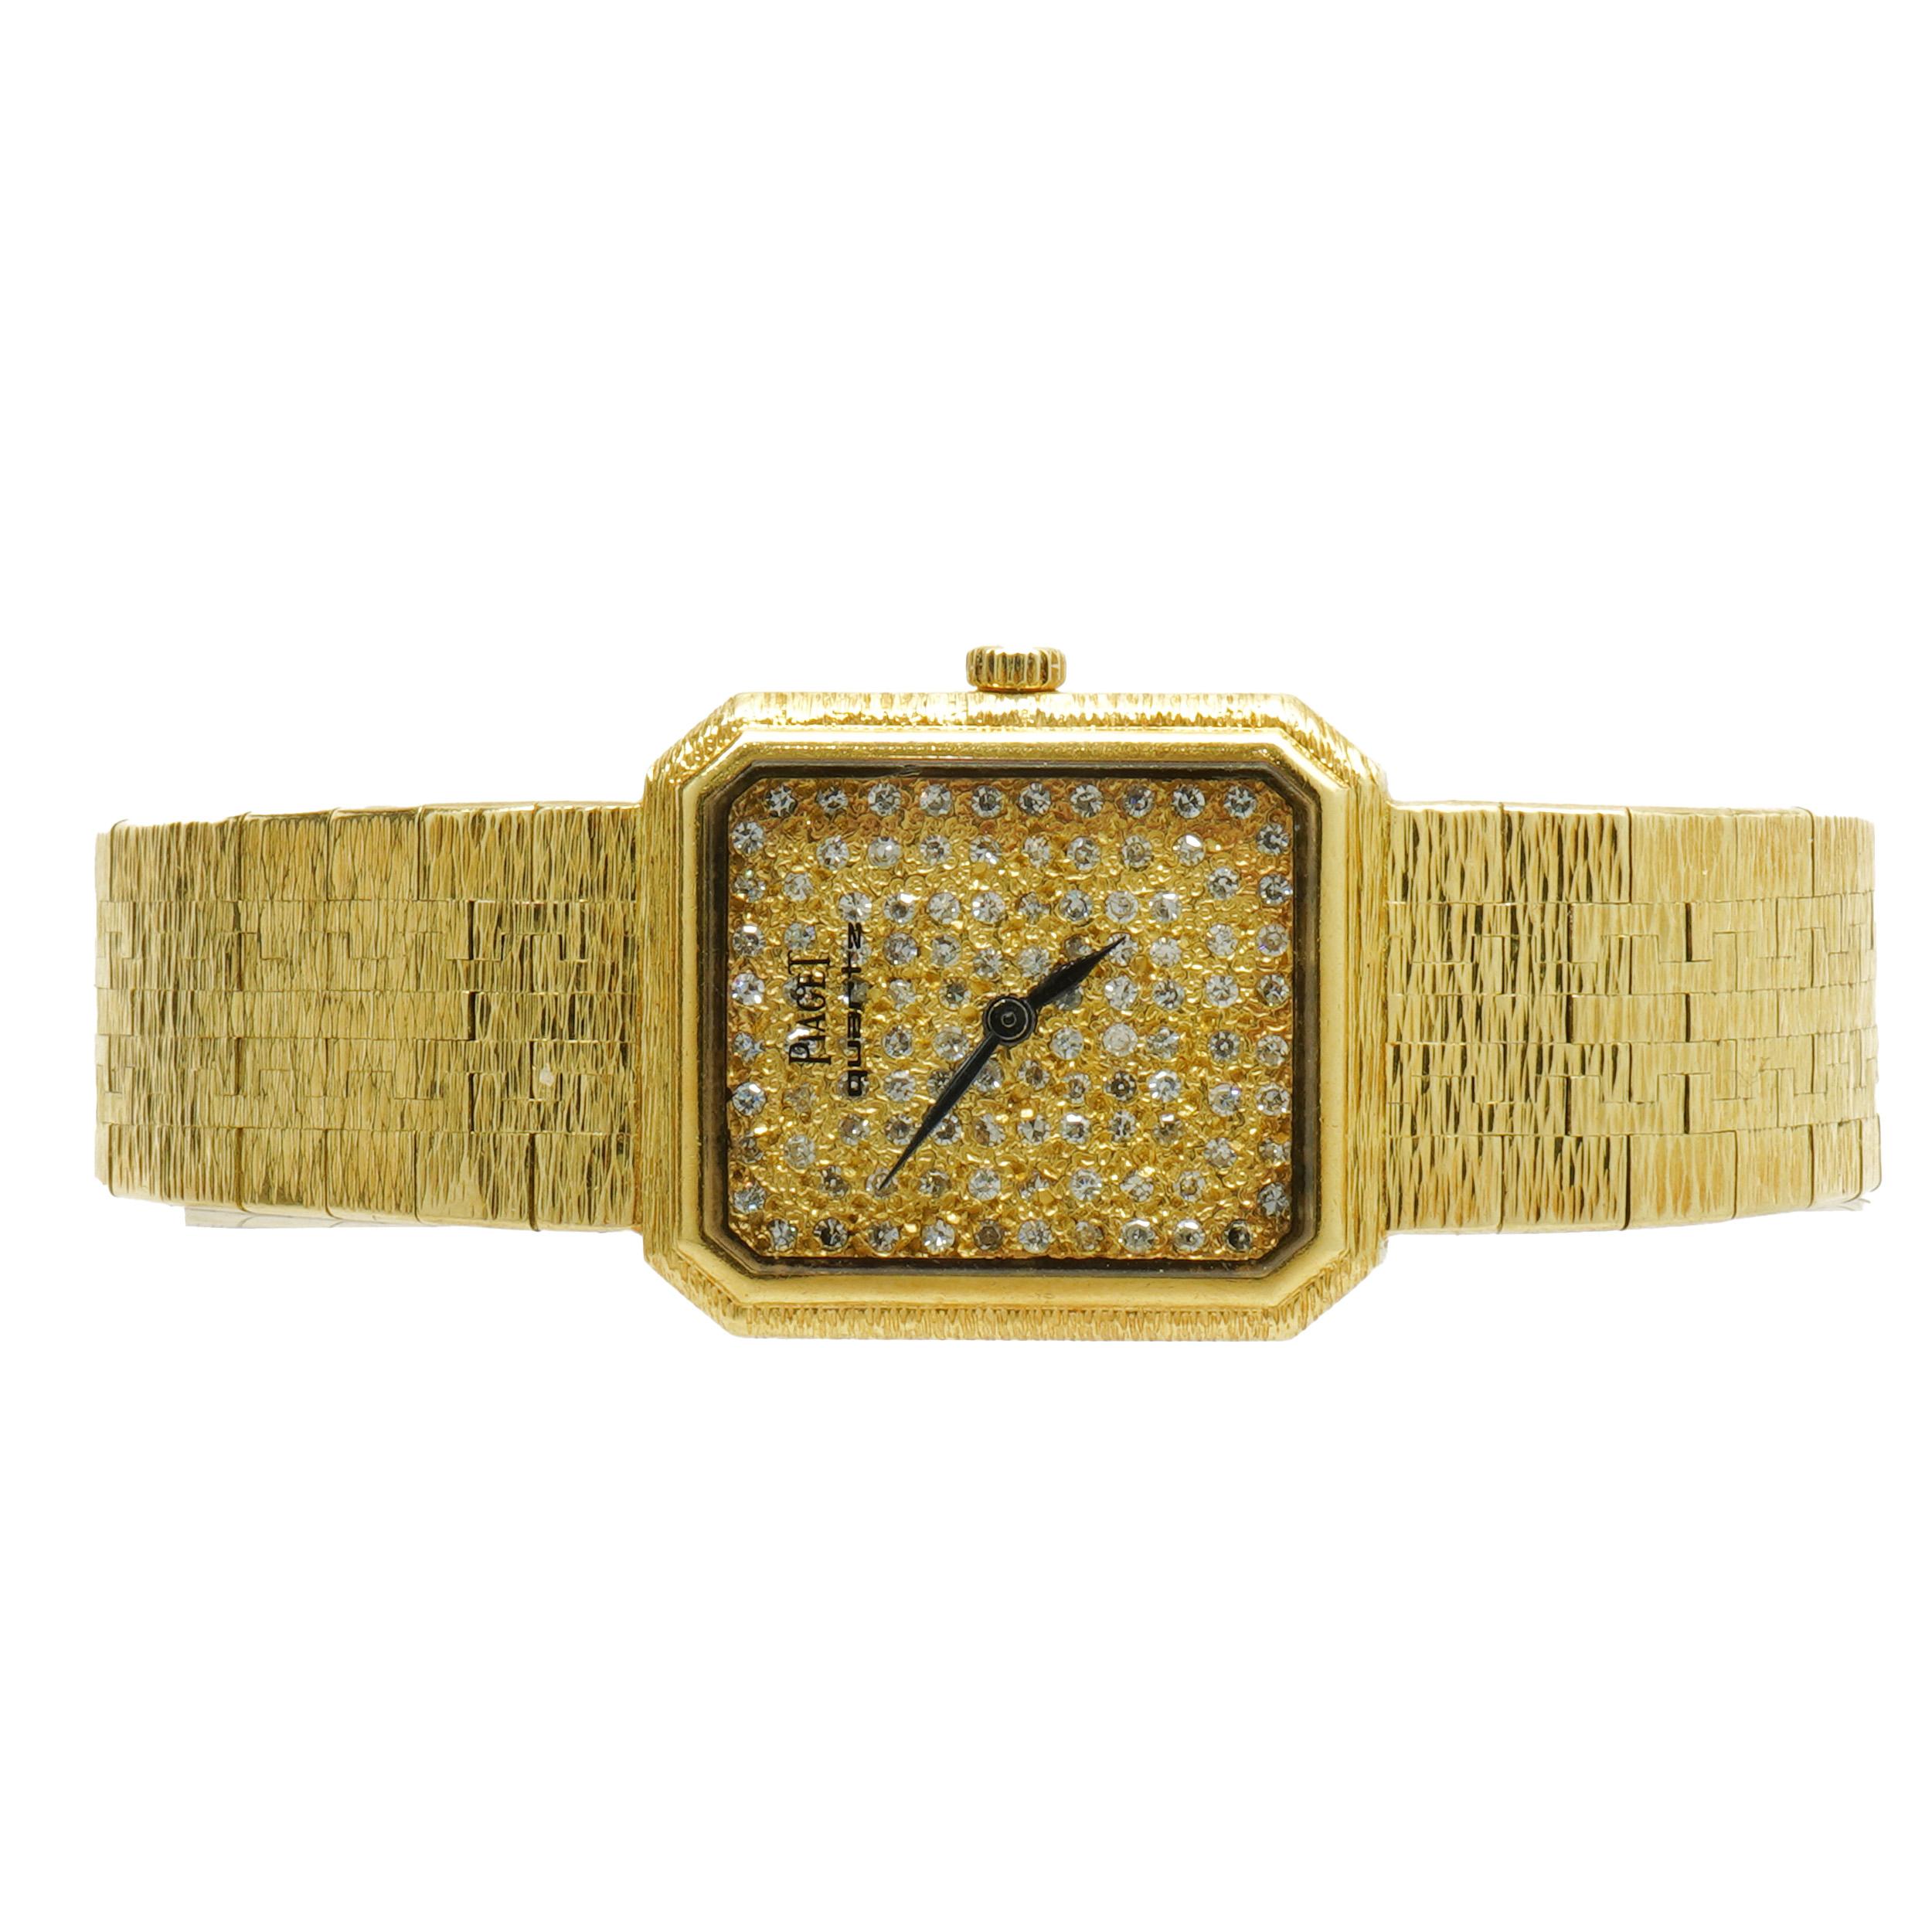 Movement: quartz
Function: hours, minutes
Case: 23x20mm yellow gold square case, scratch resistant sapphire crystal, push/pull crown
Band: yellow gold Piaget mesh link bracelet 
Dial: champagne diamond dial
Serial: 375XXX
Reference :